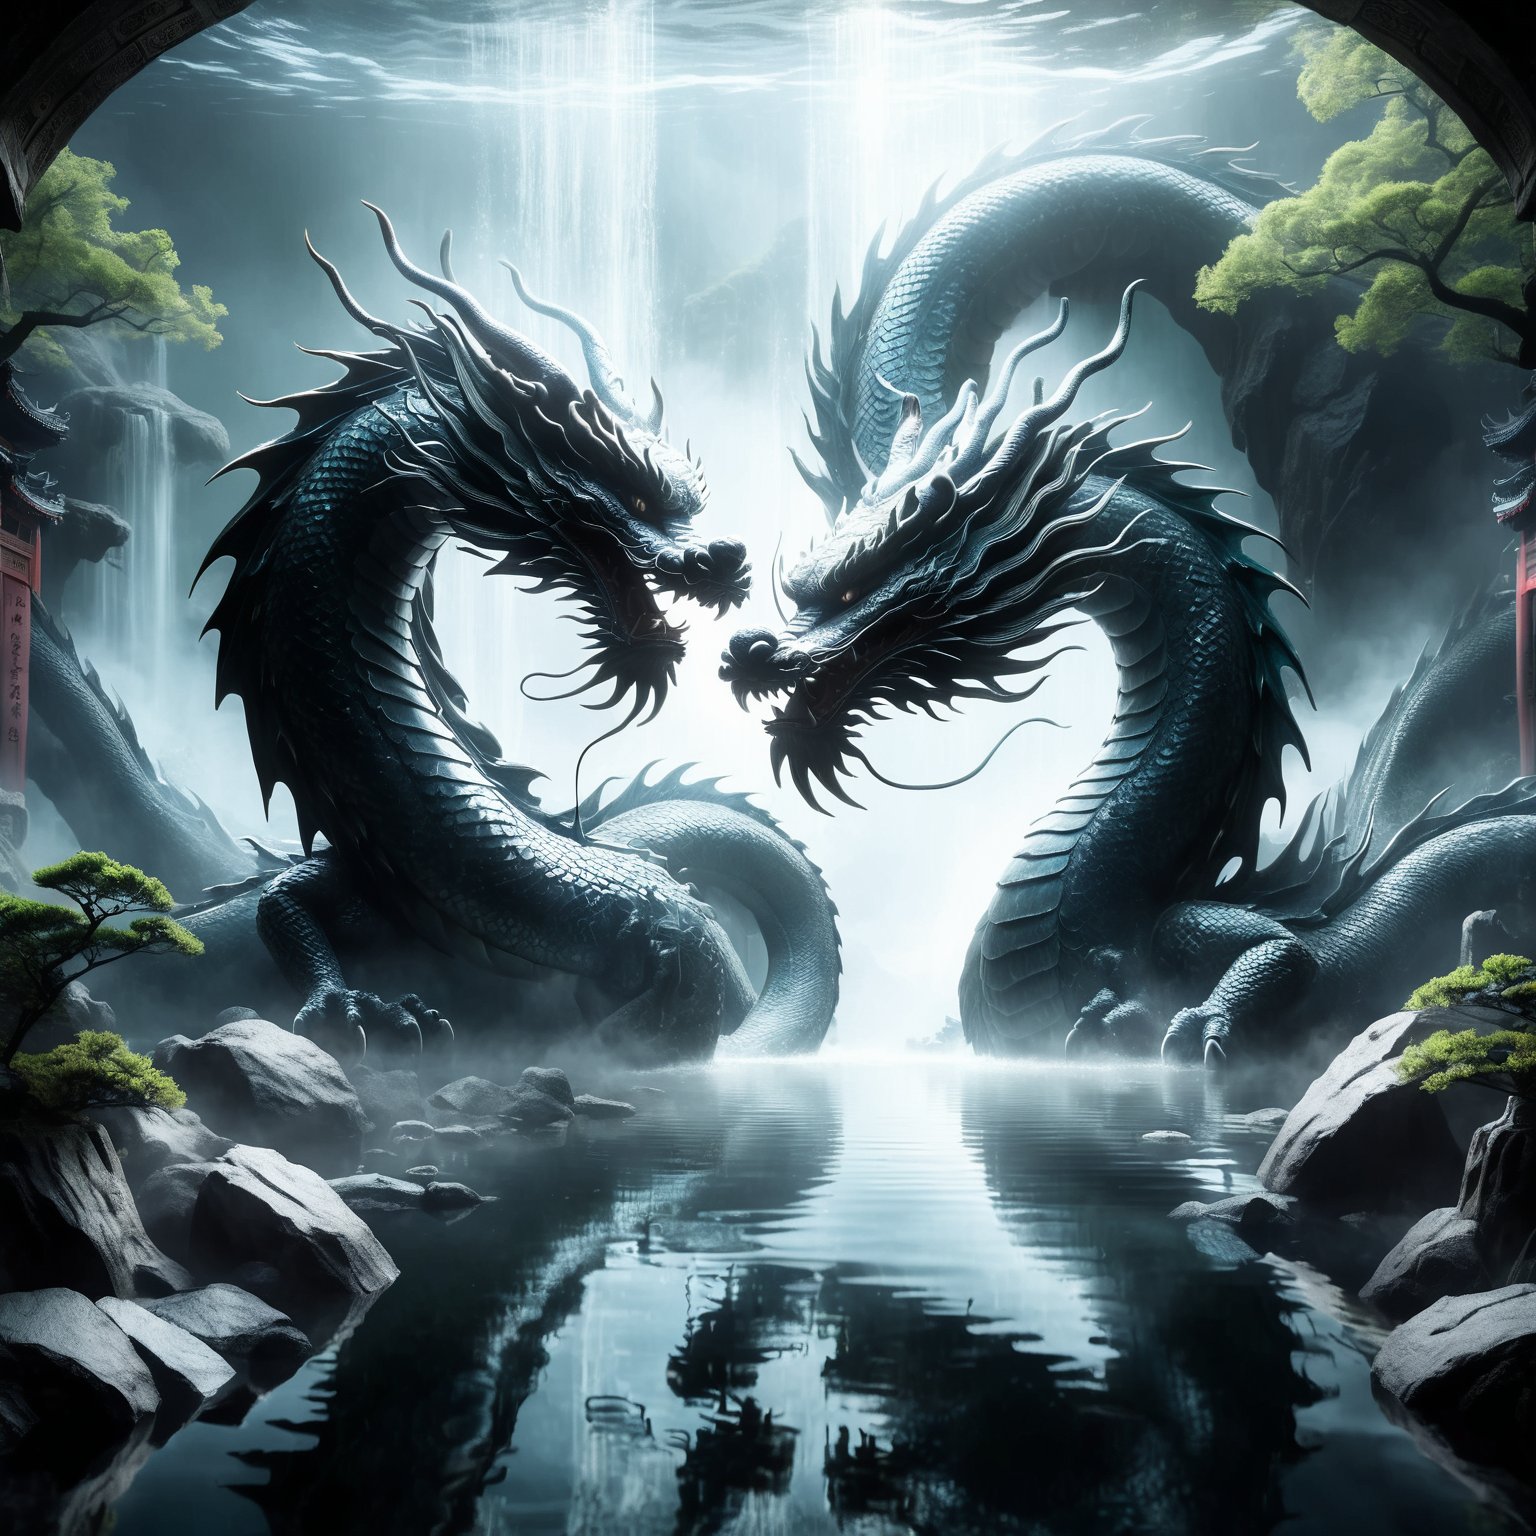 Mystical scene, 'Hidden dragon, do not act' concept, traditional Chinese dragon, splendid scales, lurking in depths of ancient dragon pool, readiness yet restraint, partially concealed by dark waters, immense potential, controlled power, mysterious setting, silhouette barely visible, wisdom of hidden strength, strategic patience, by FuturEvoLab, (Masterpiece, Best Quality, 8k:1.2), (Ultra-Detailed, Highres, Extremely Detailed, Absurdres, Incredibly Absurdres, Huge Filesize:1.1), evoking anticipation and mystery,Katon